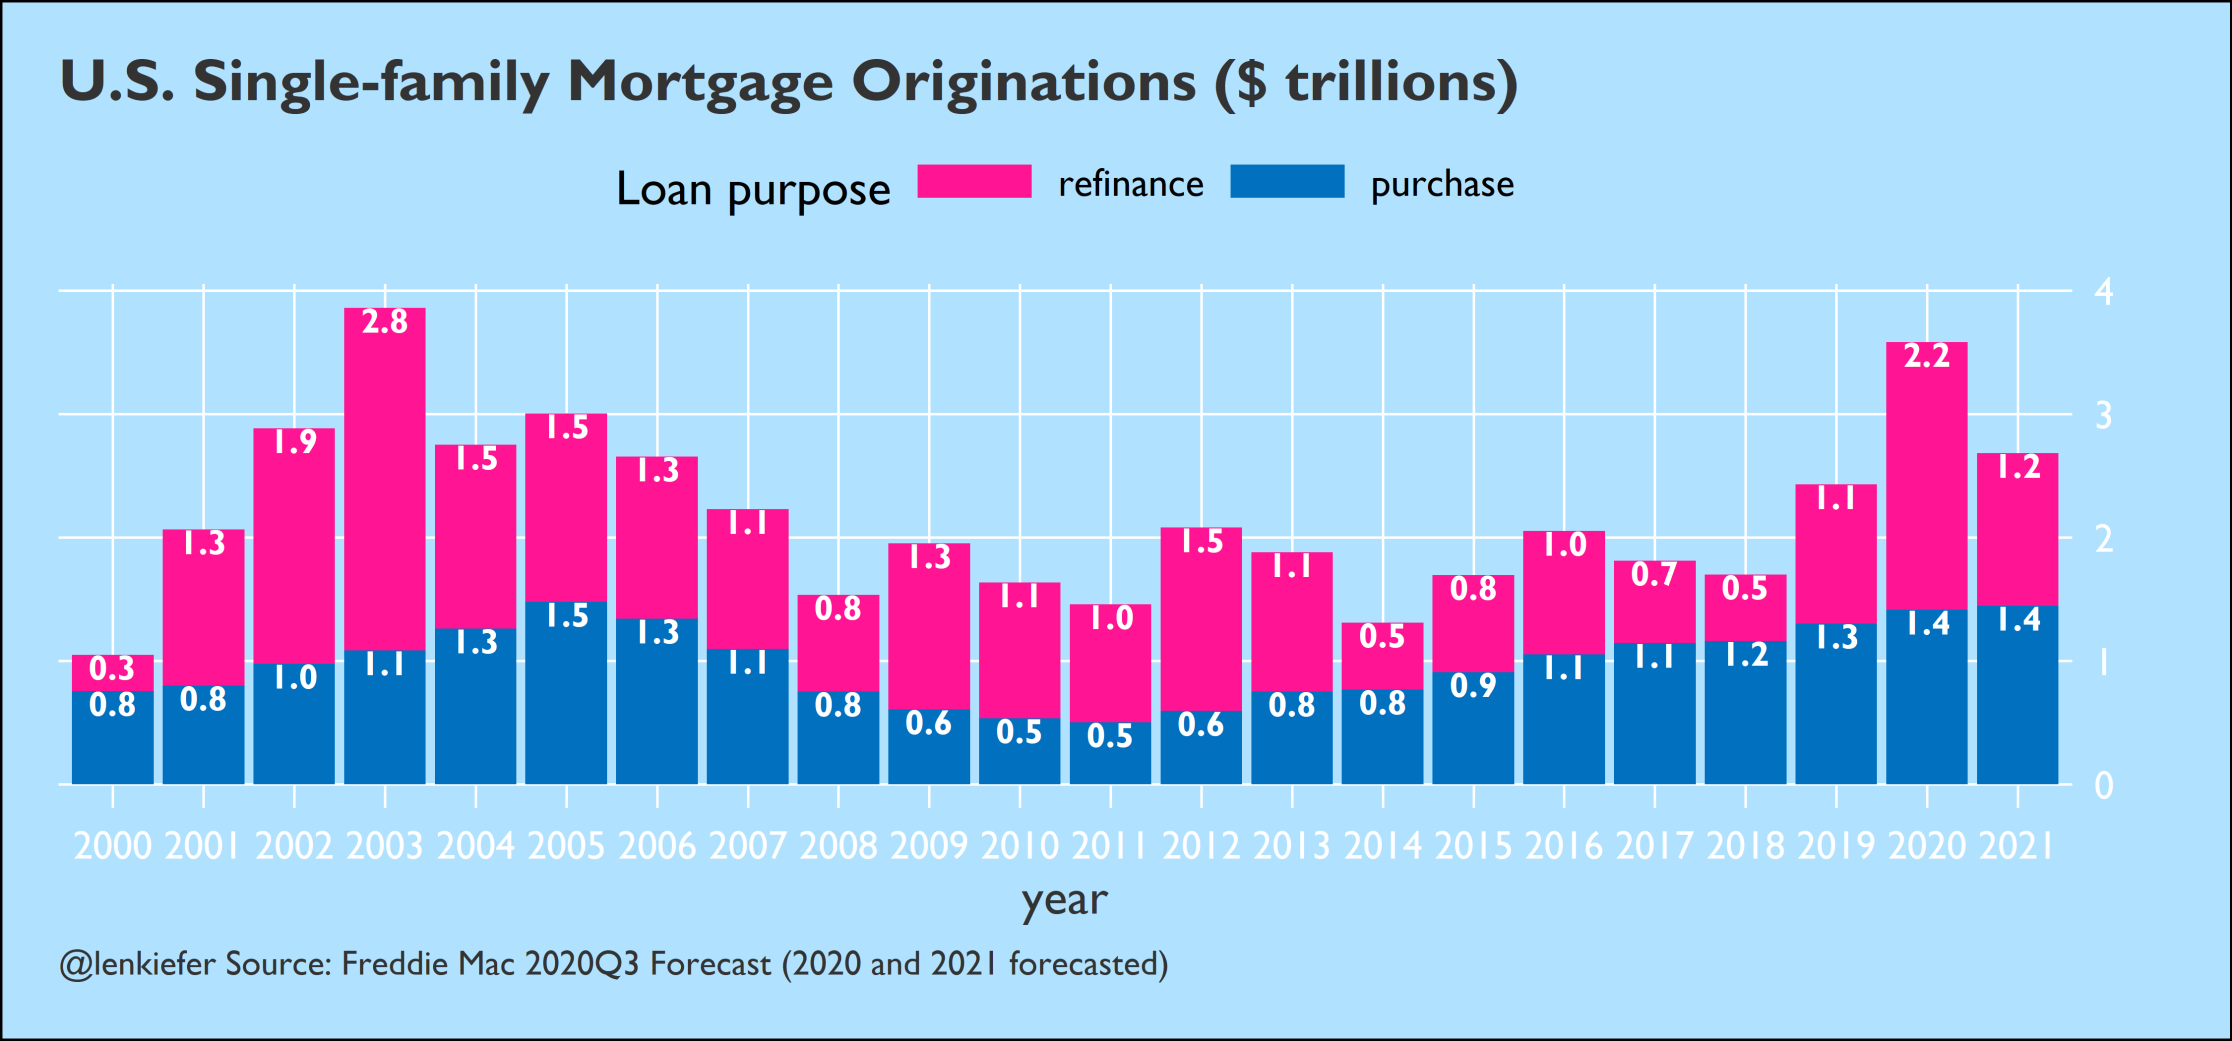 Chart of mortgage originations history and 2020-2021 forecast from Freddie Mac